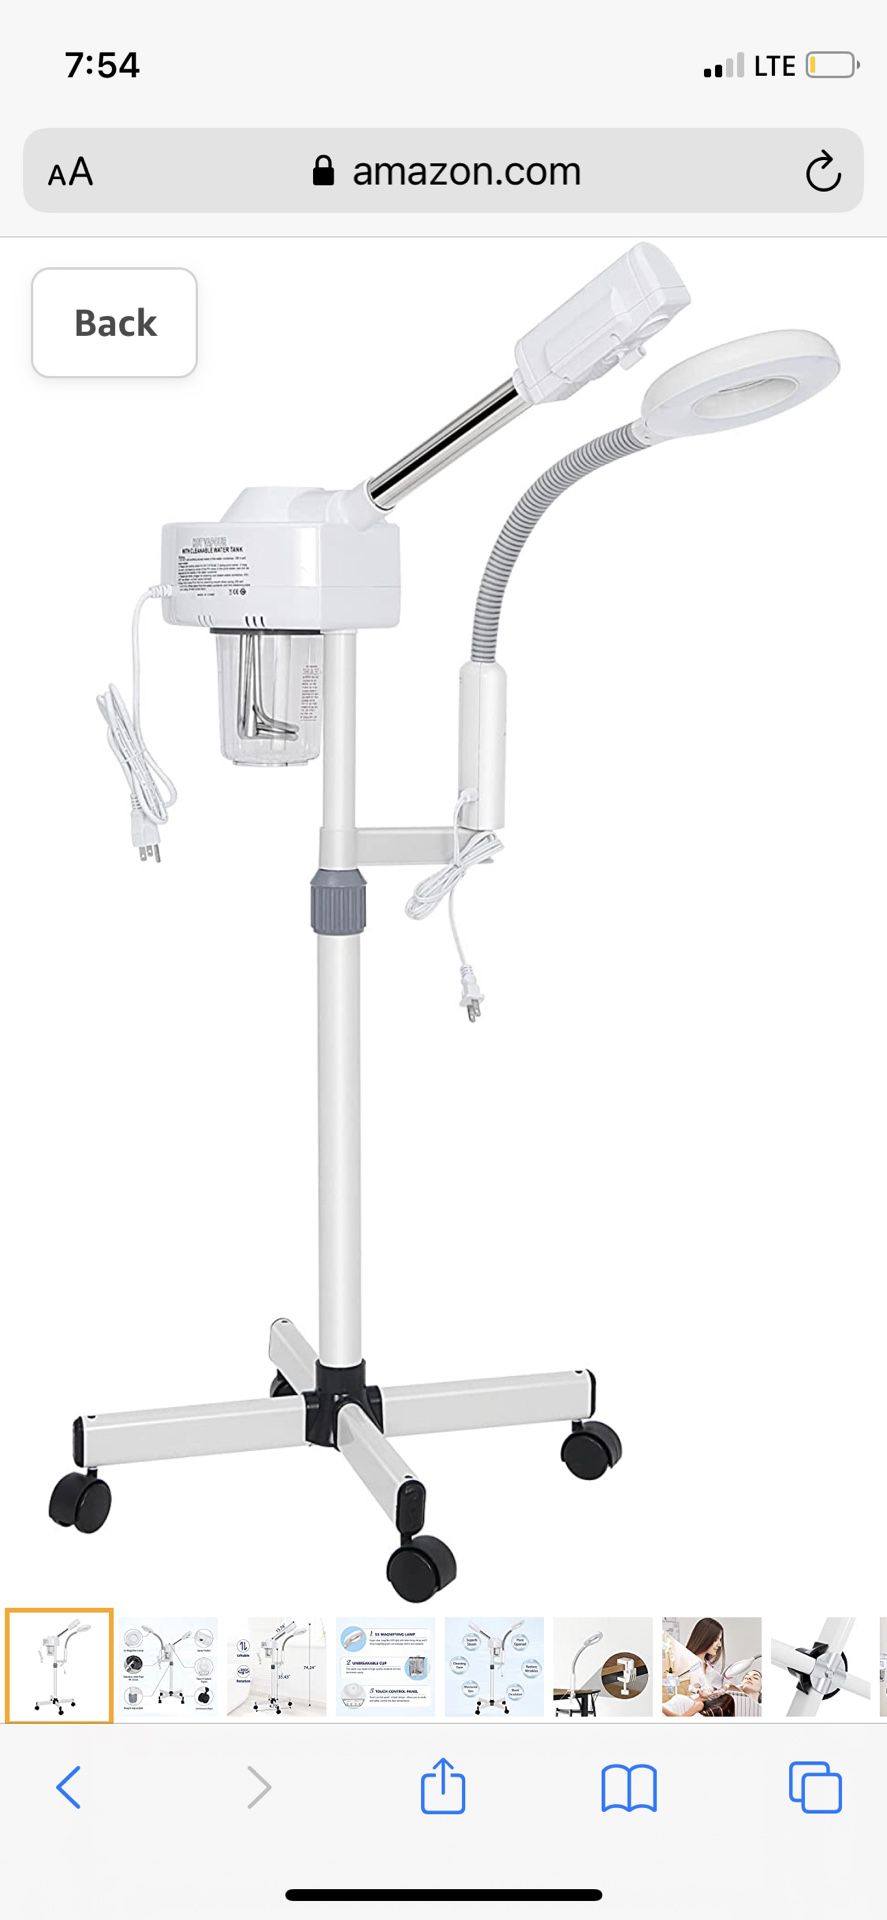 Brandb2 in 1 Facial Steamer With 5X Magnifying Lamp For Salon Spa Beauty